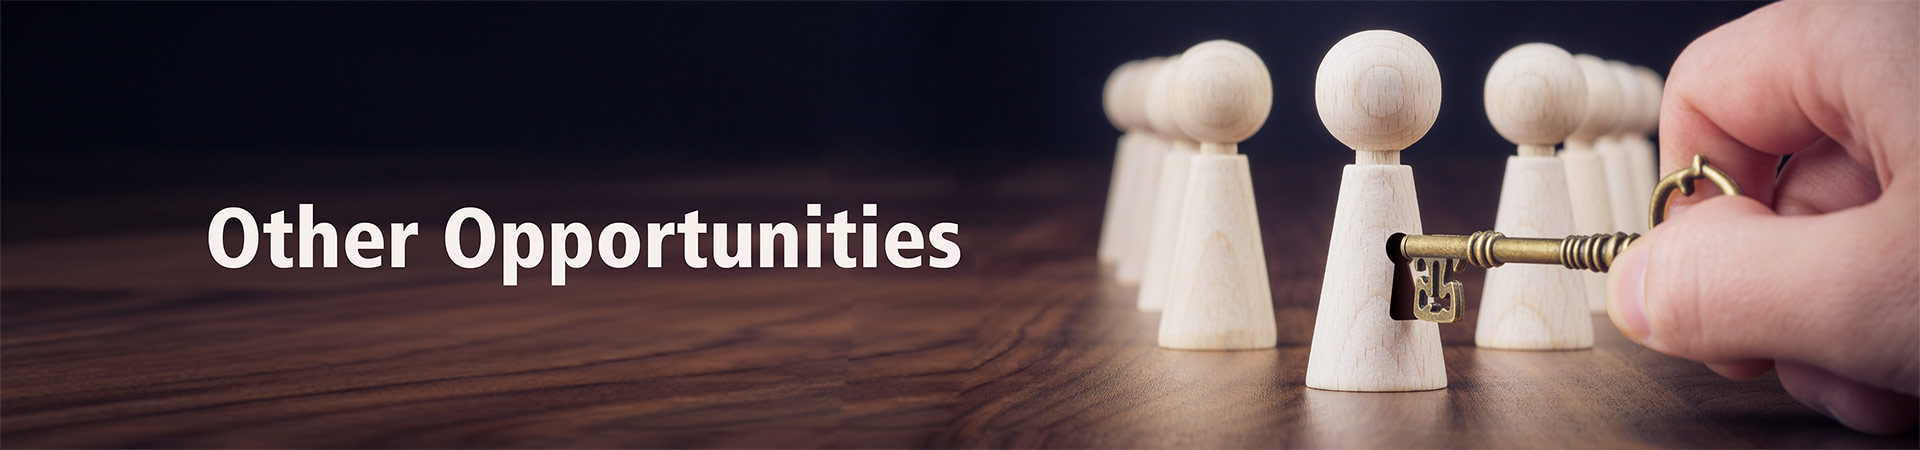 Other Opportunities banner